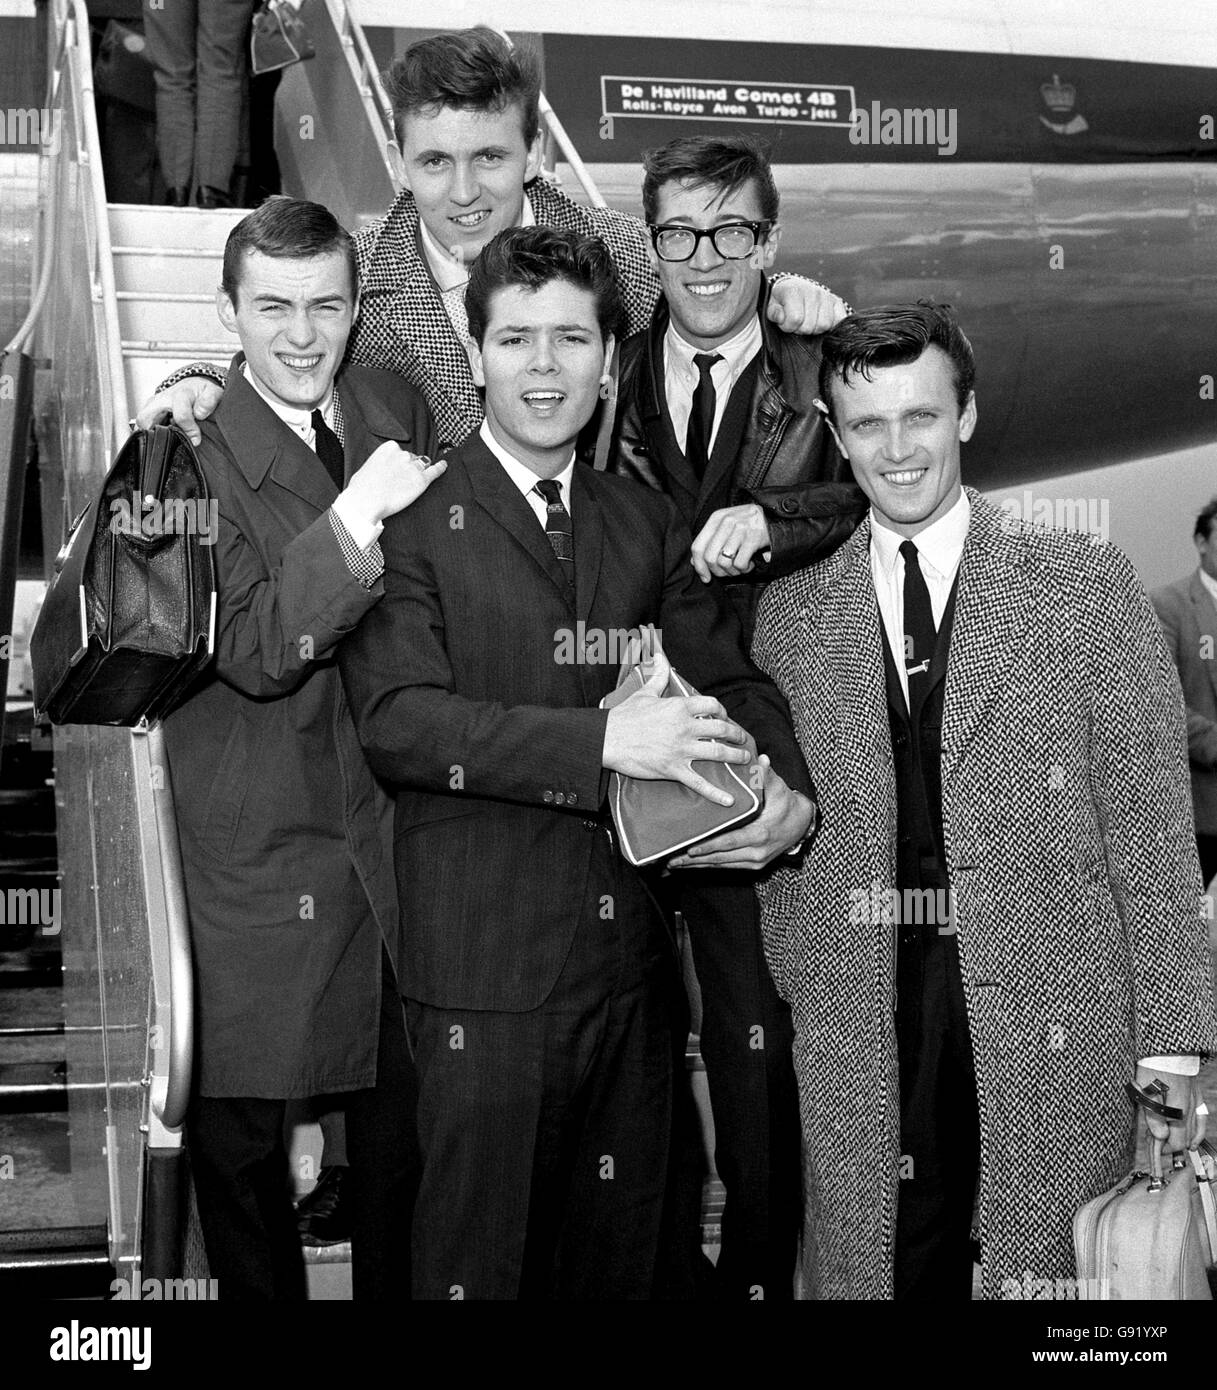 Pop singer Cliff Richard and members of his supporting instrumental band The Shadows at London Airport as they are about to fly off on their Scandinavian Tour. Stock Photo